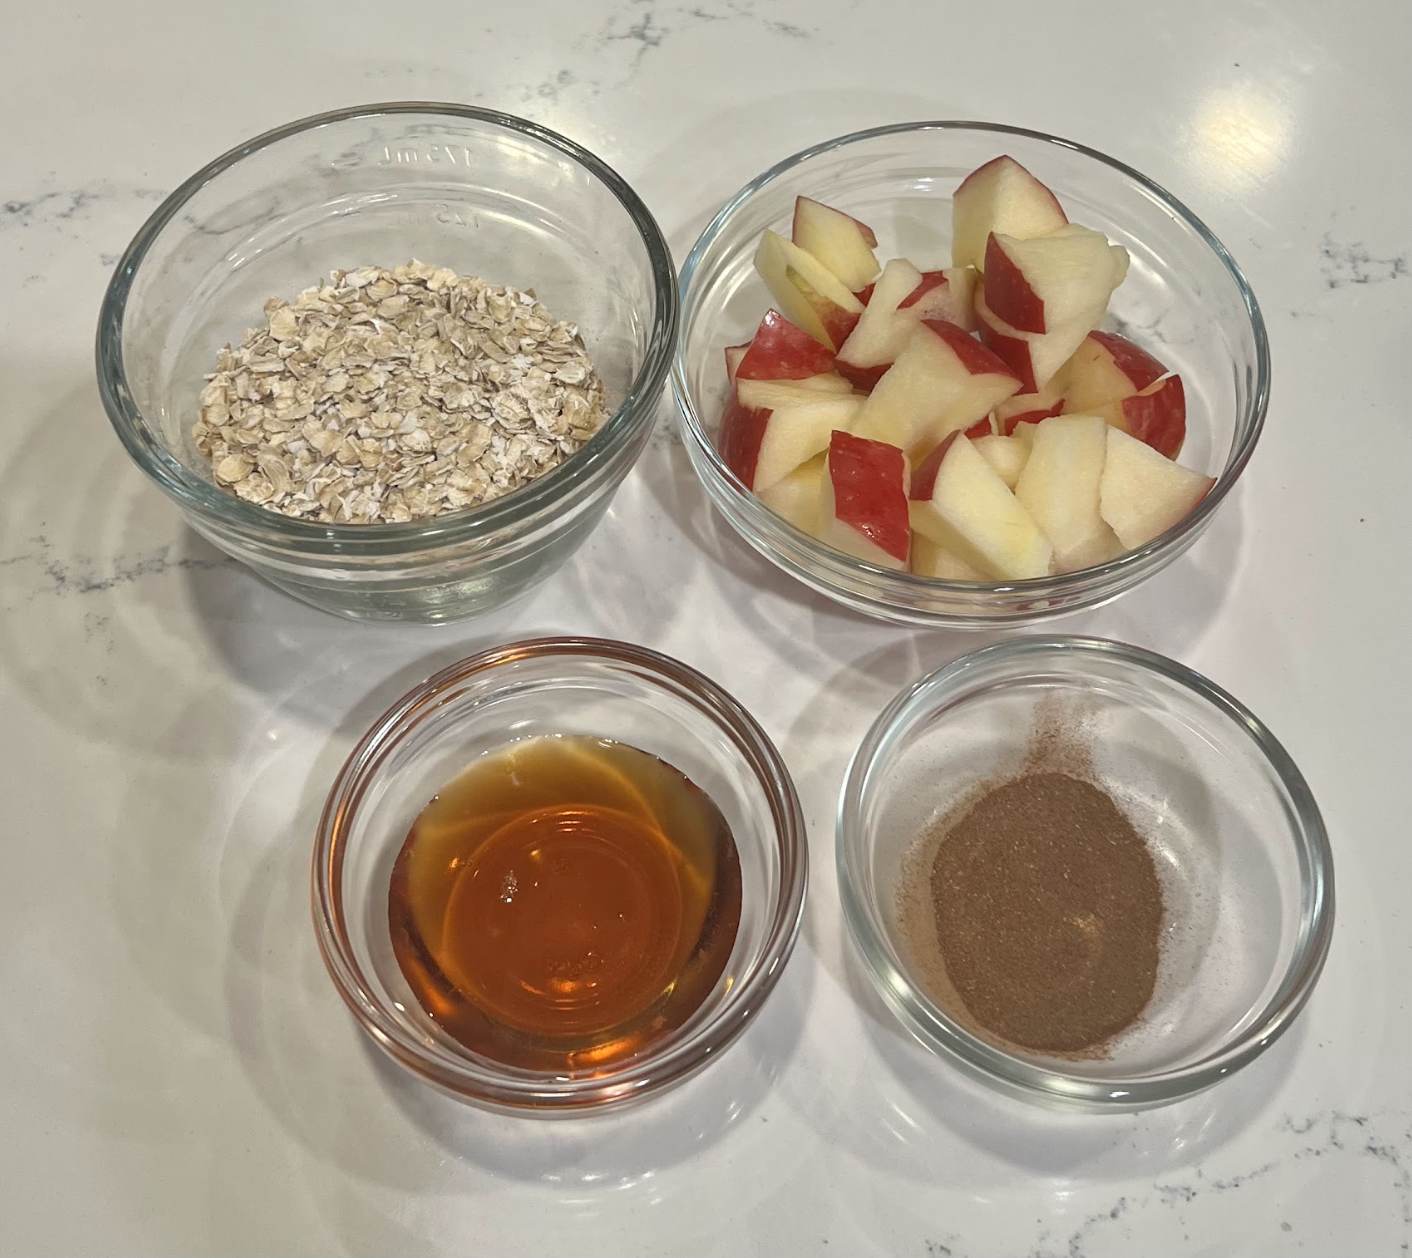 sliced apples, honey, cinnamon, and oats in glass bowls